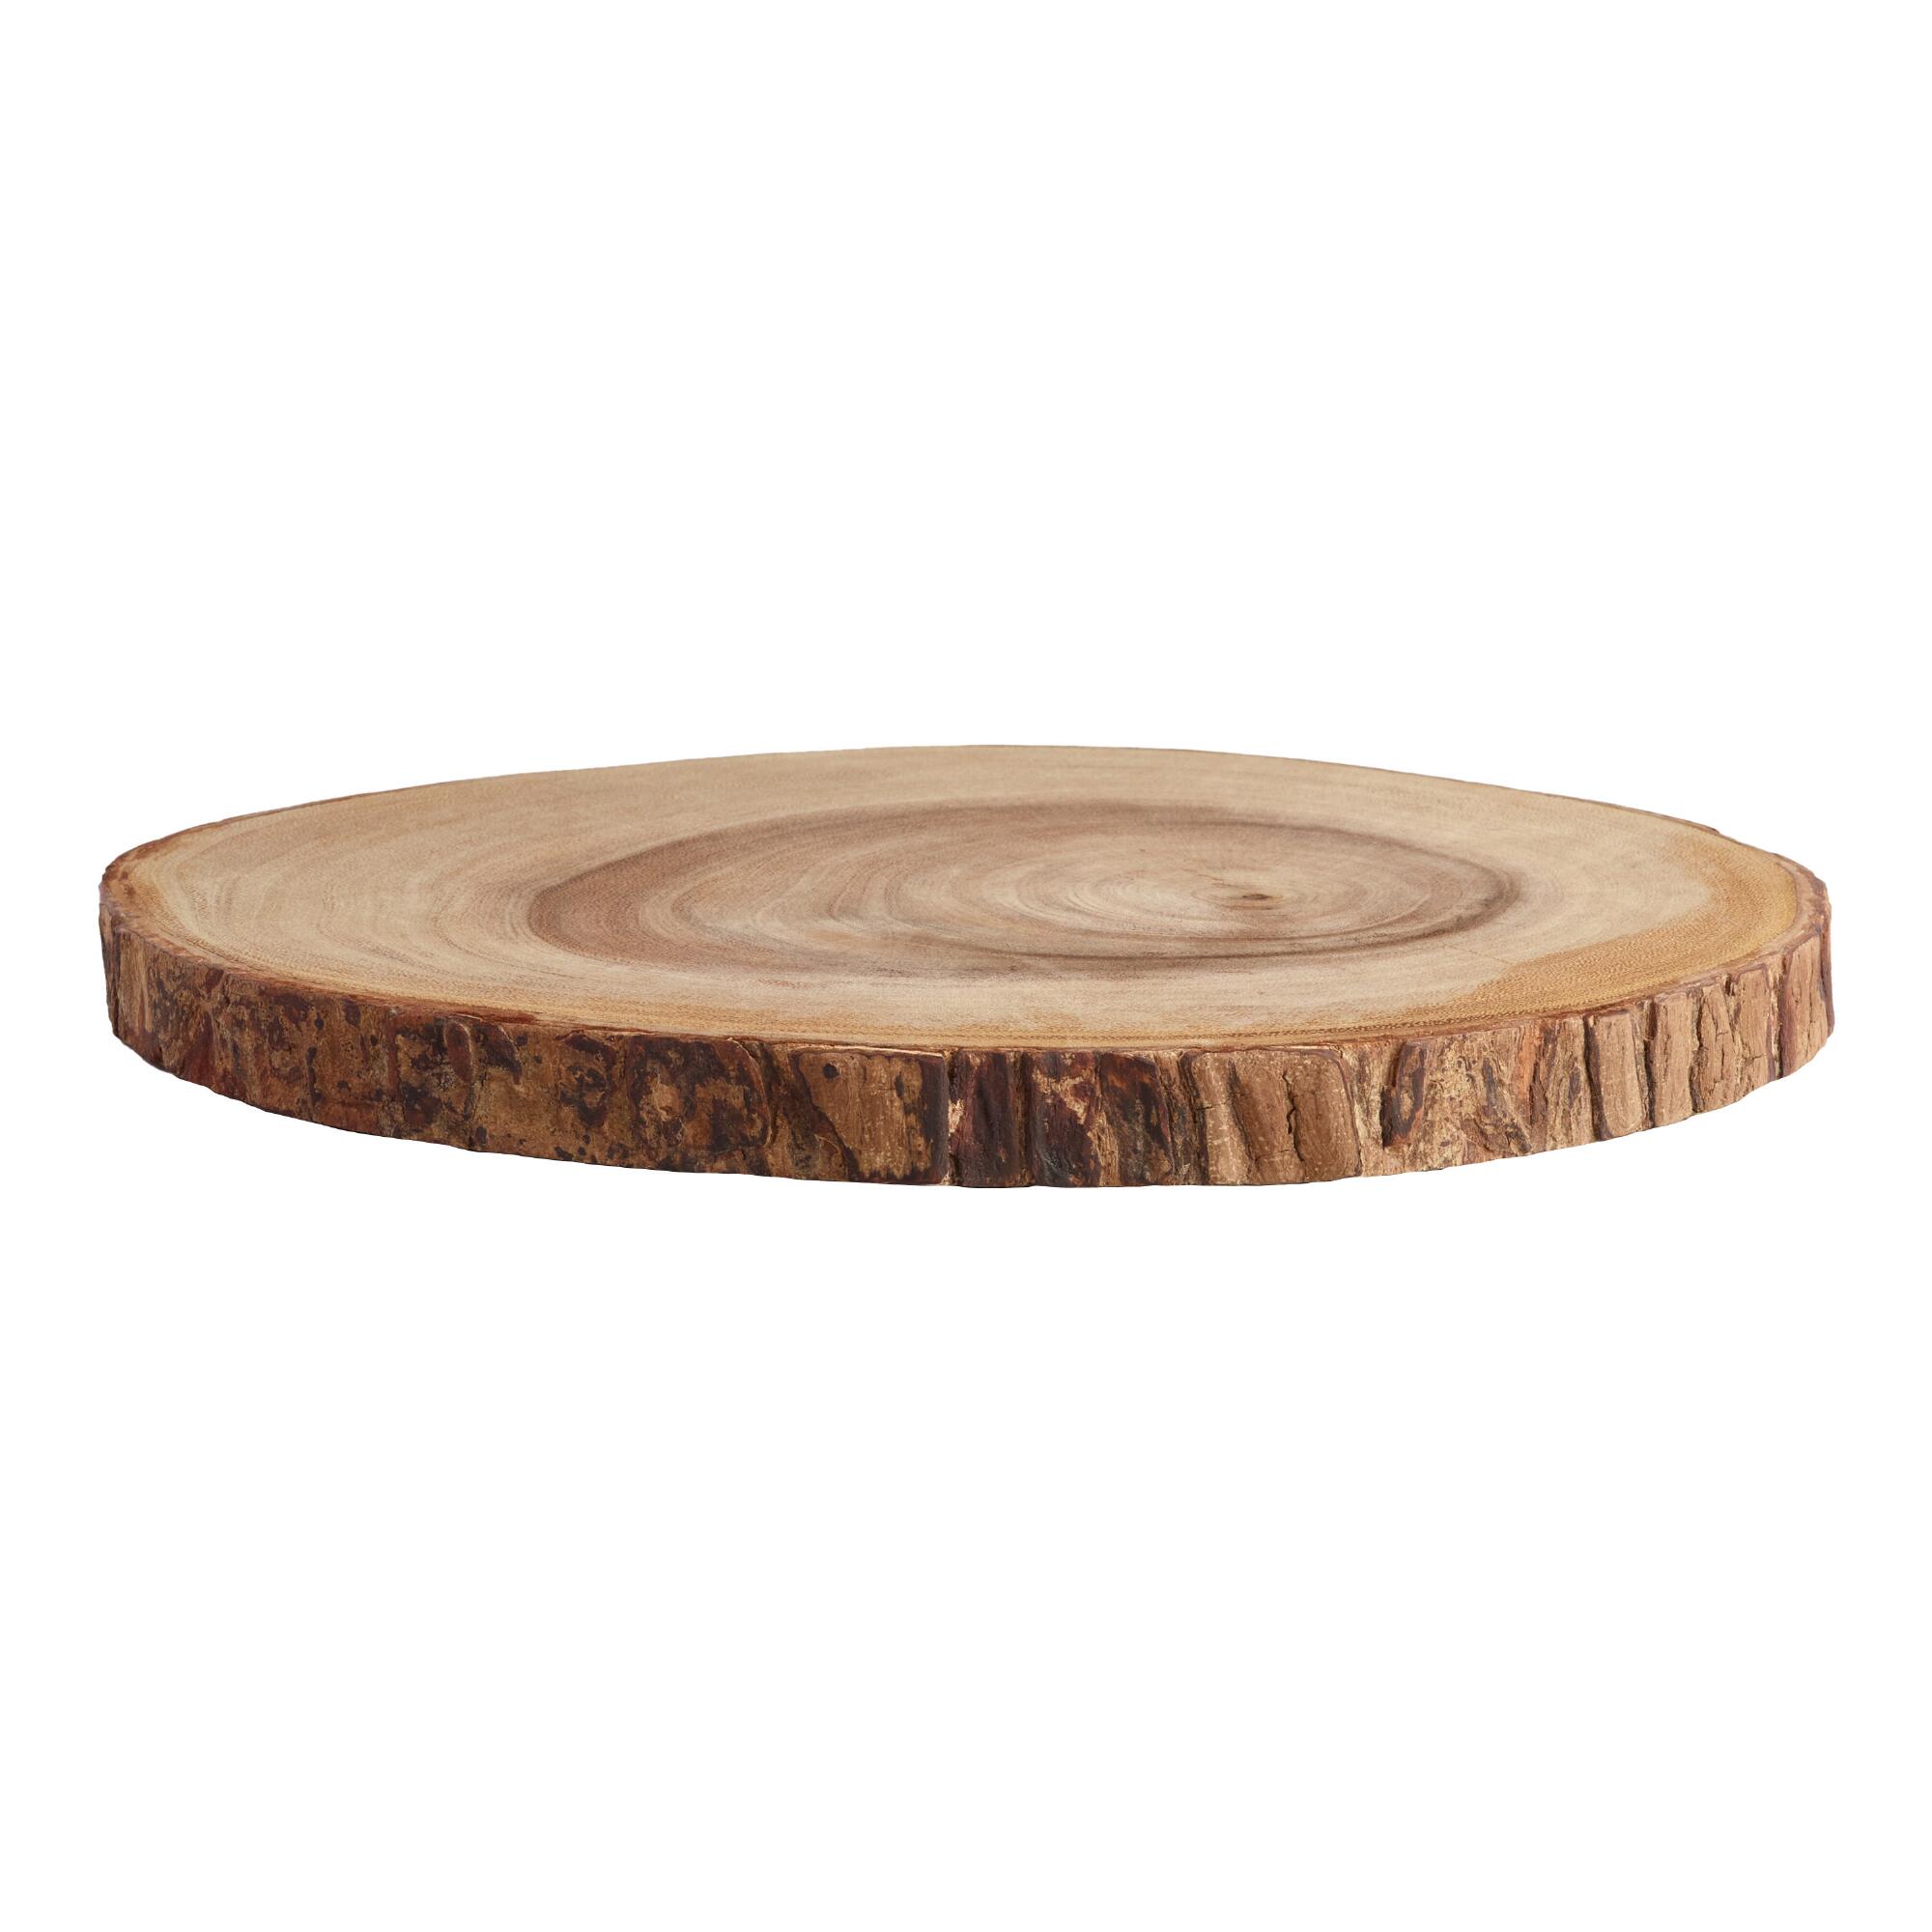 Wooden Bark Charger: Brown/Natural by World Market